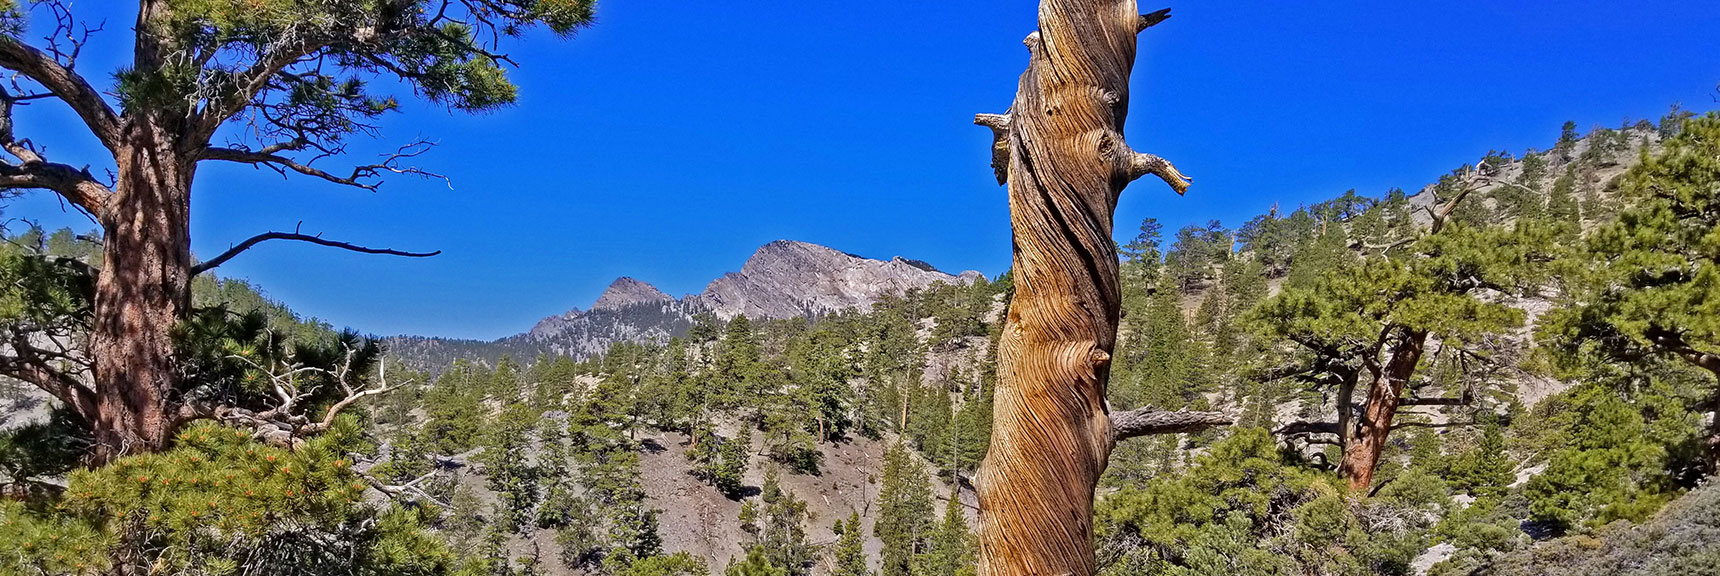 Sisters Come Into View. South is Closest, North is Furthest | Macks Peak | Mt Charleston Wilderness | Spring Mountains, Nevada